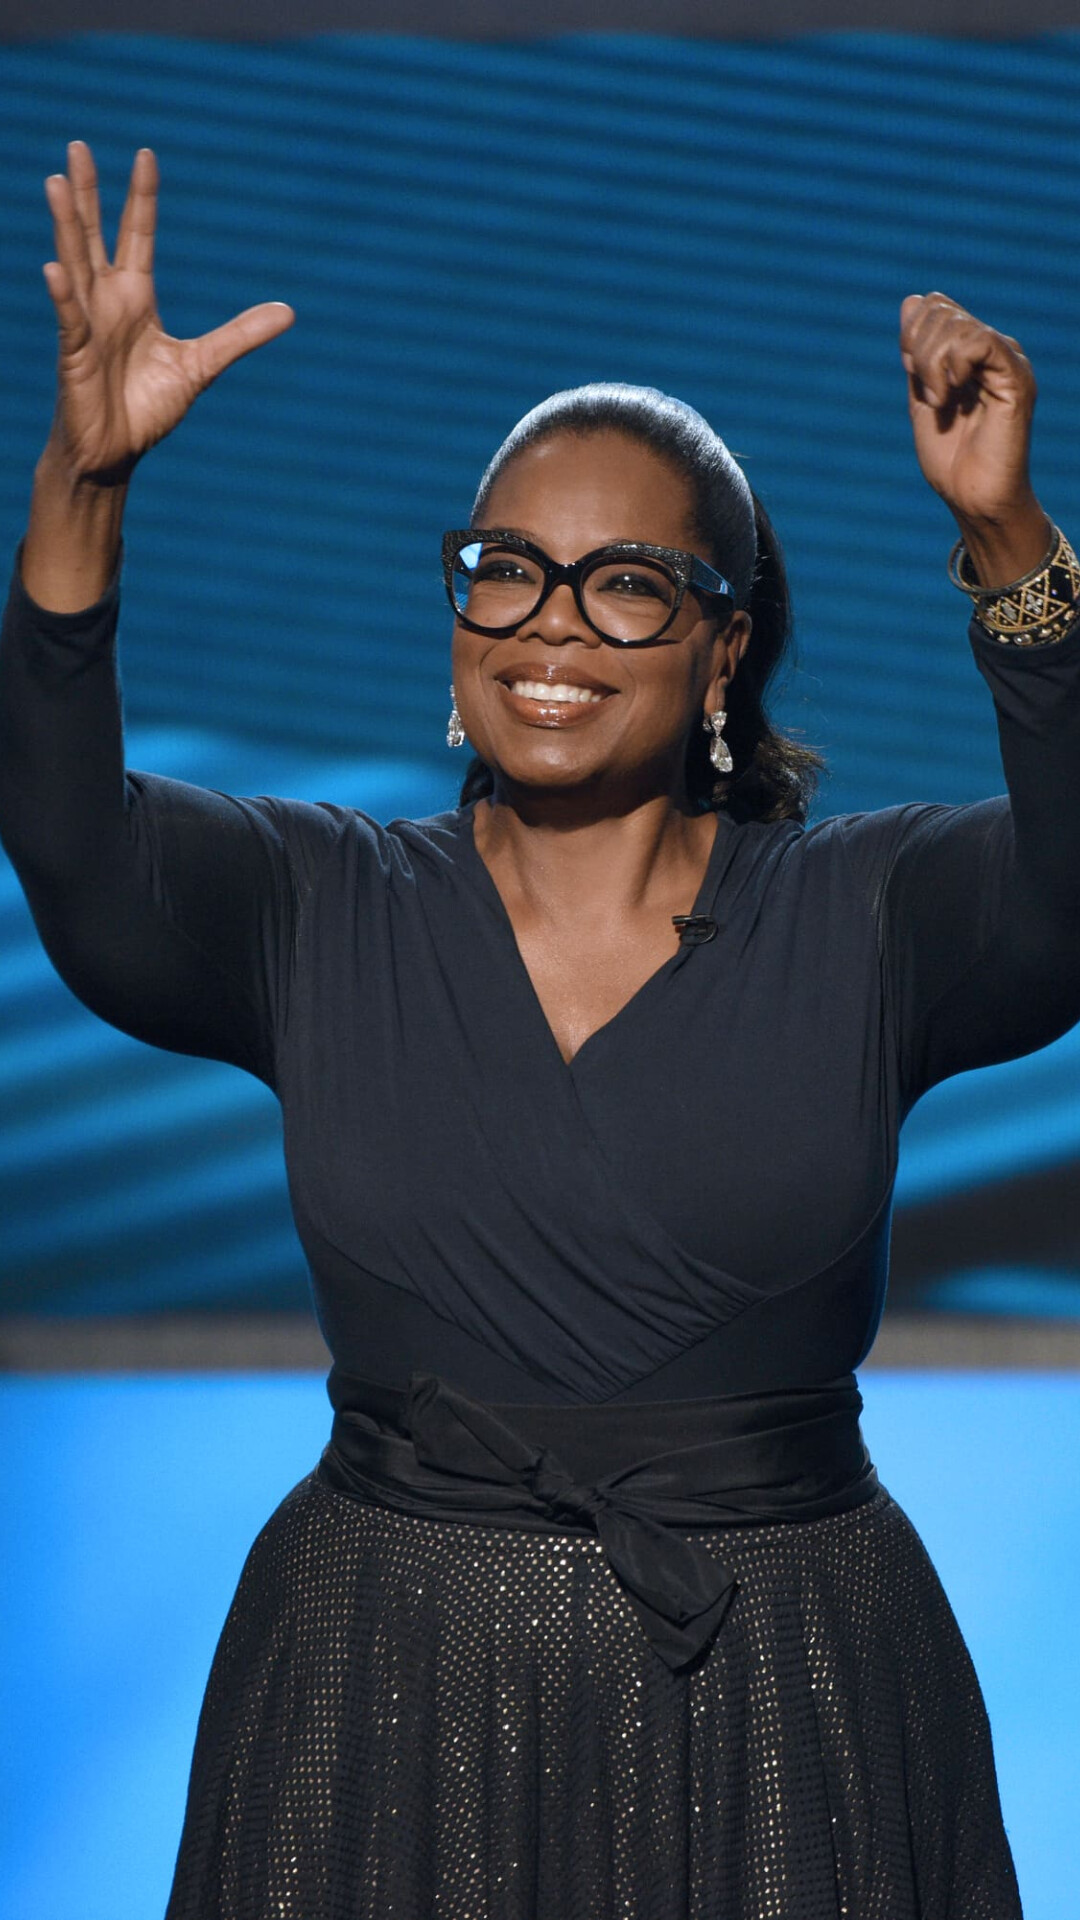 Oprah Winfrey: The most watched daytime show host on television, Primetime Emmy Awards. 1080x1920 Full HD Wallpaper.